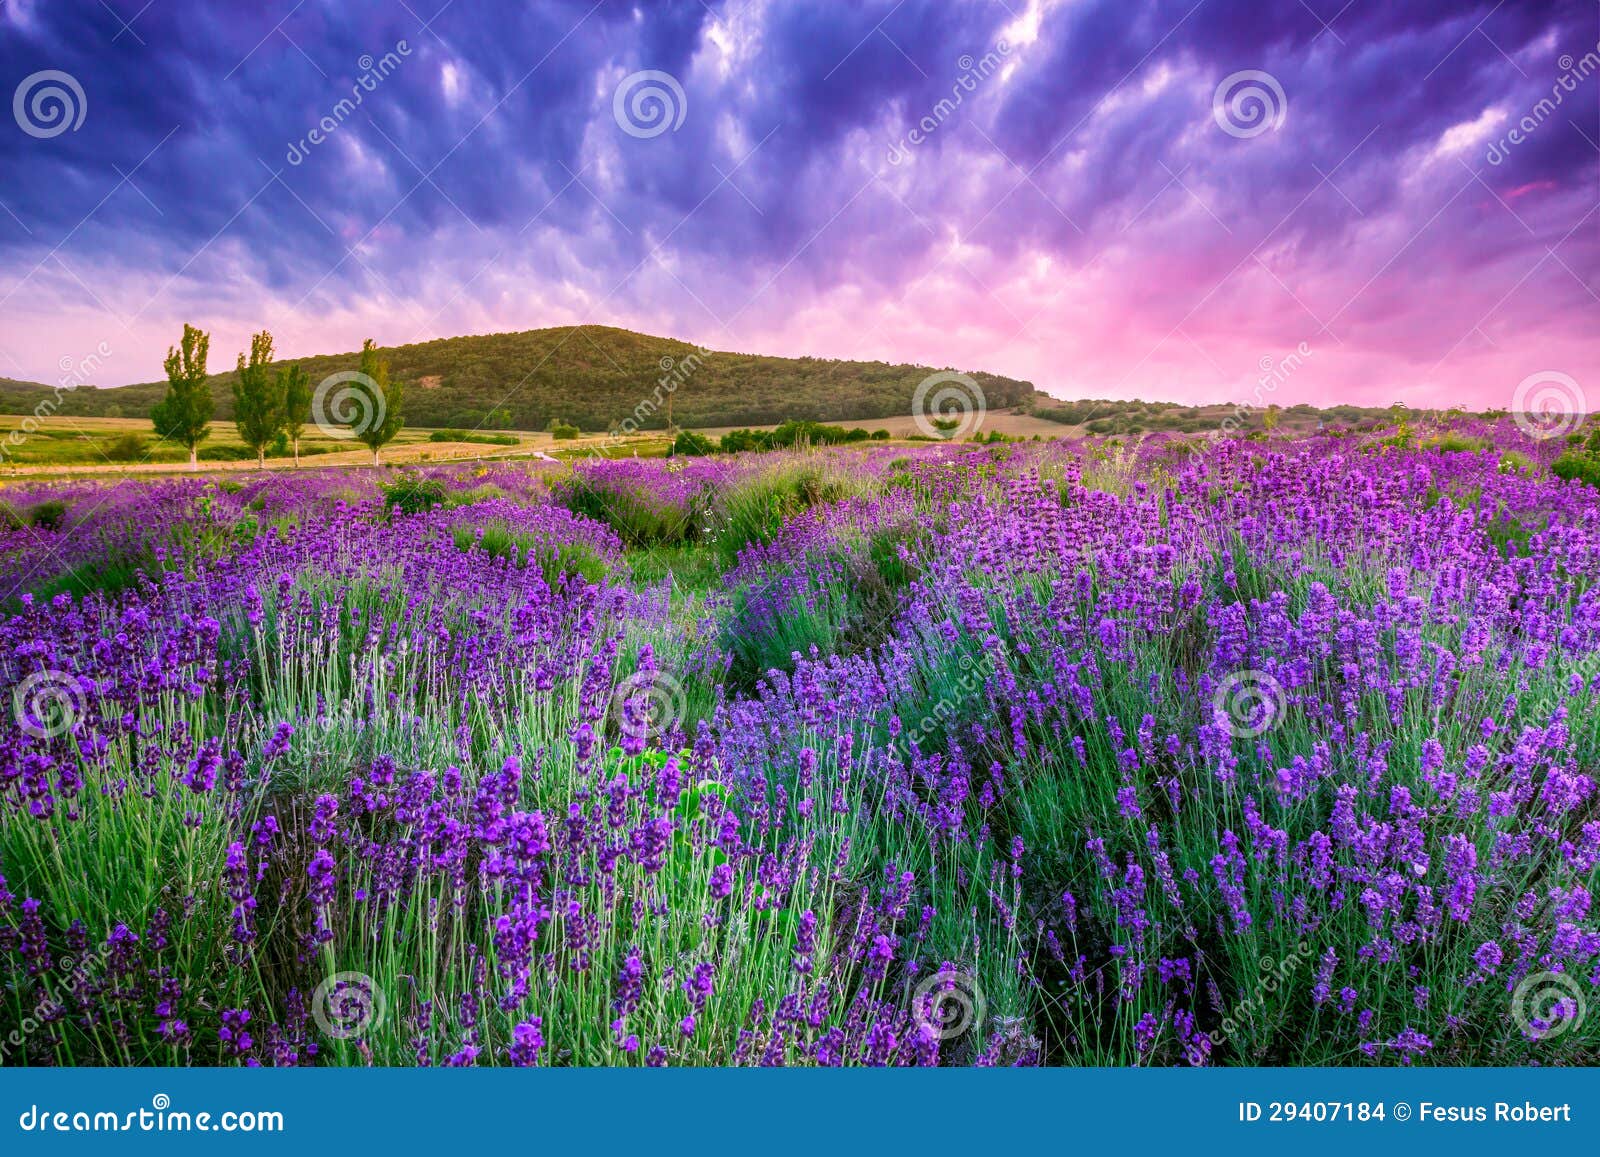 sunset over a summer lavender field in tihany, hungary